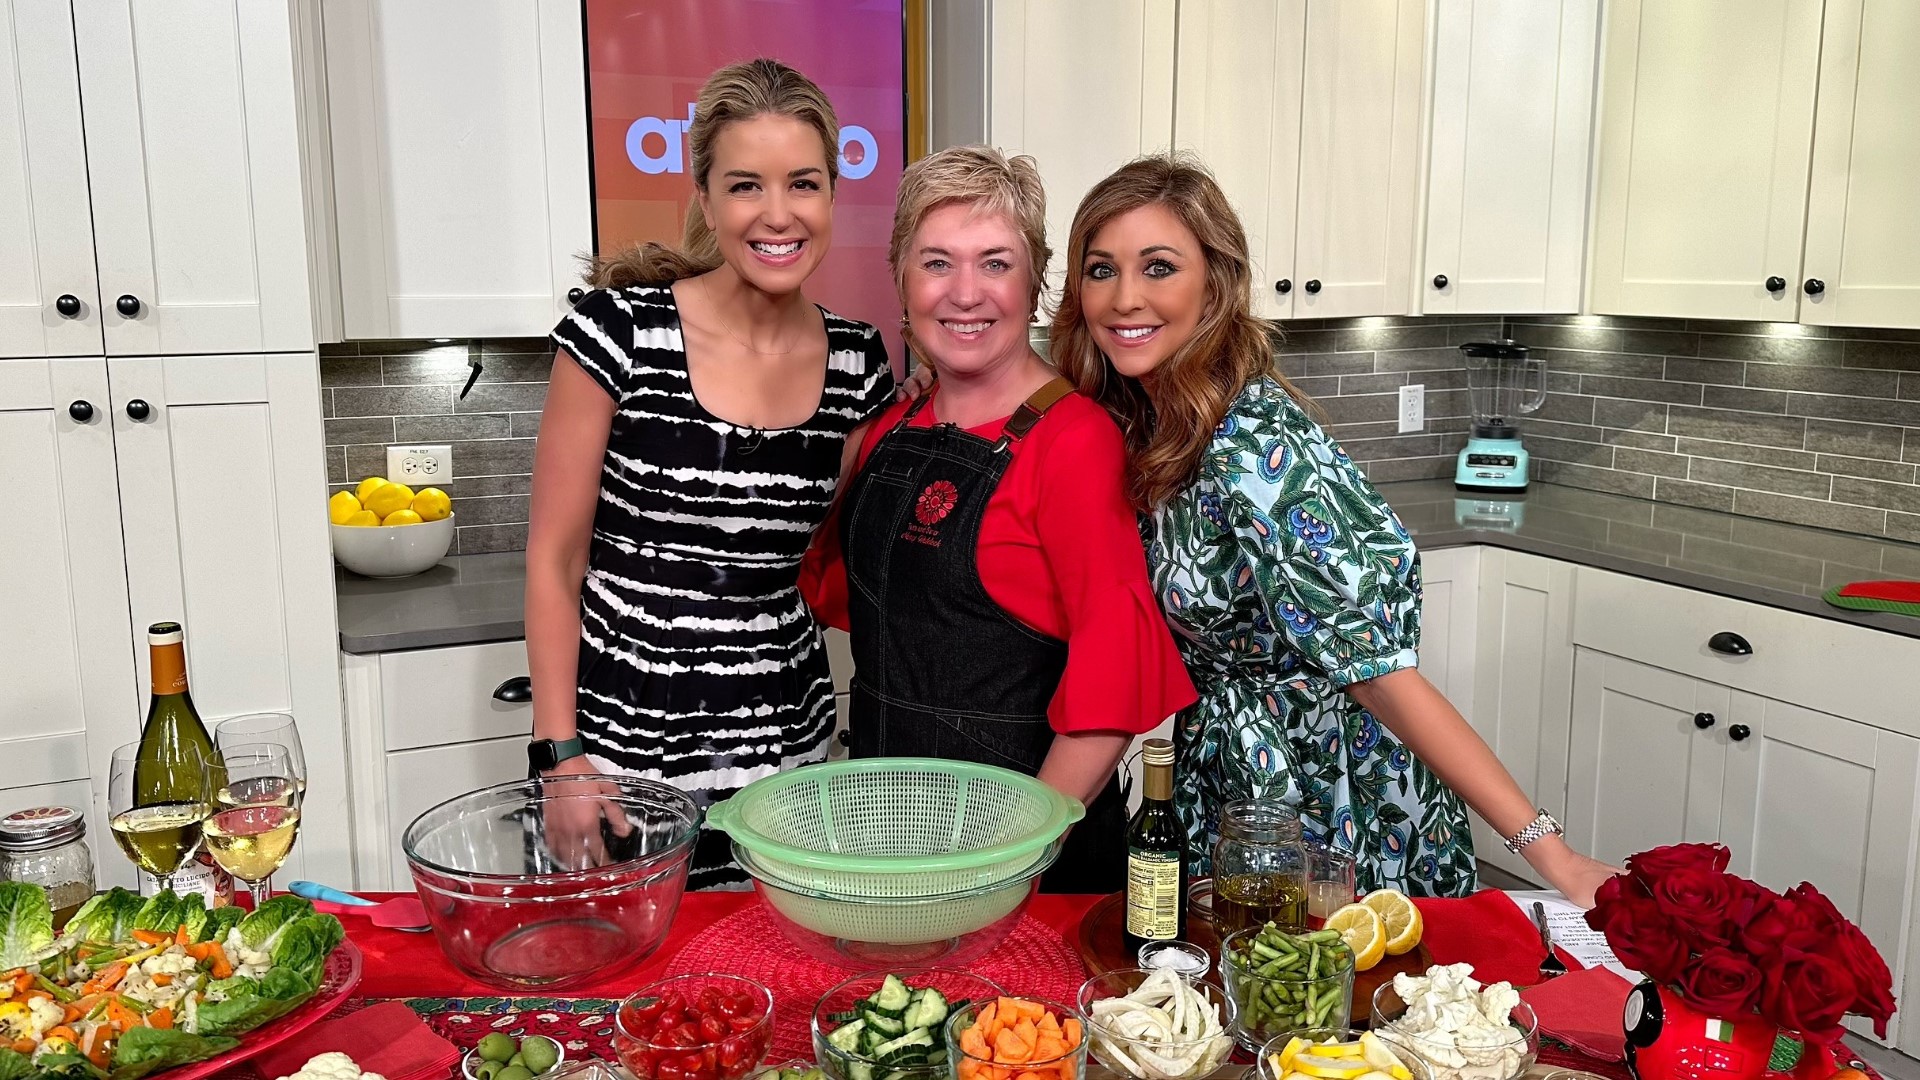 Whip up a fresh and flavorful summer salad with Chef Nancy Waldeck.